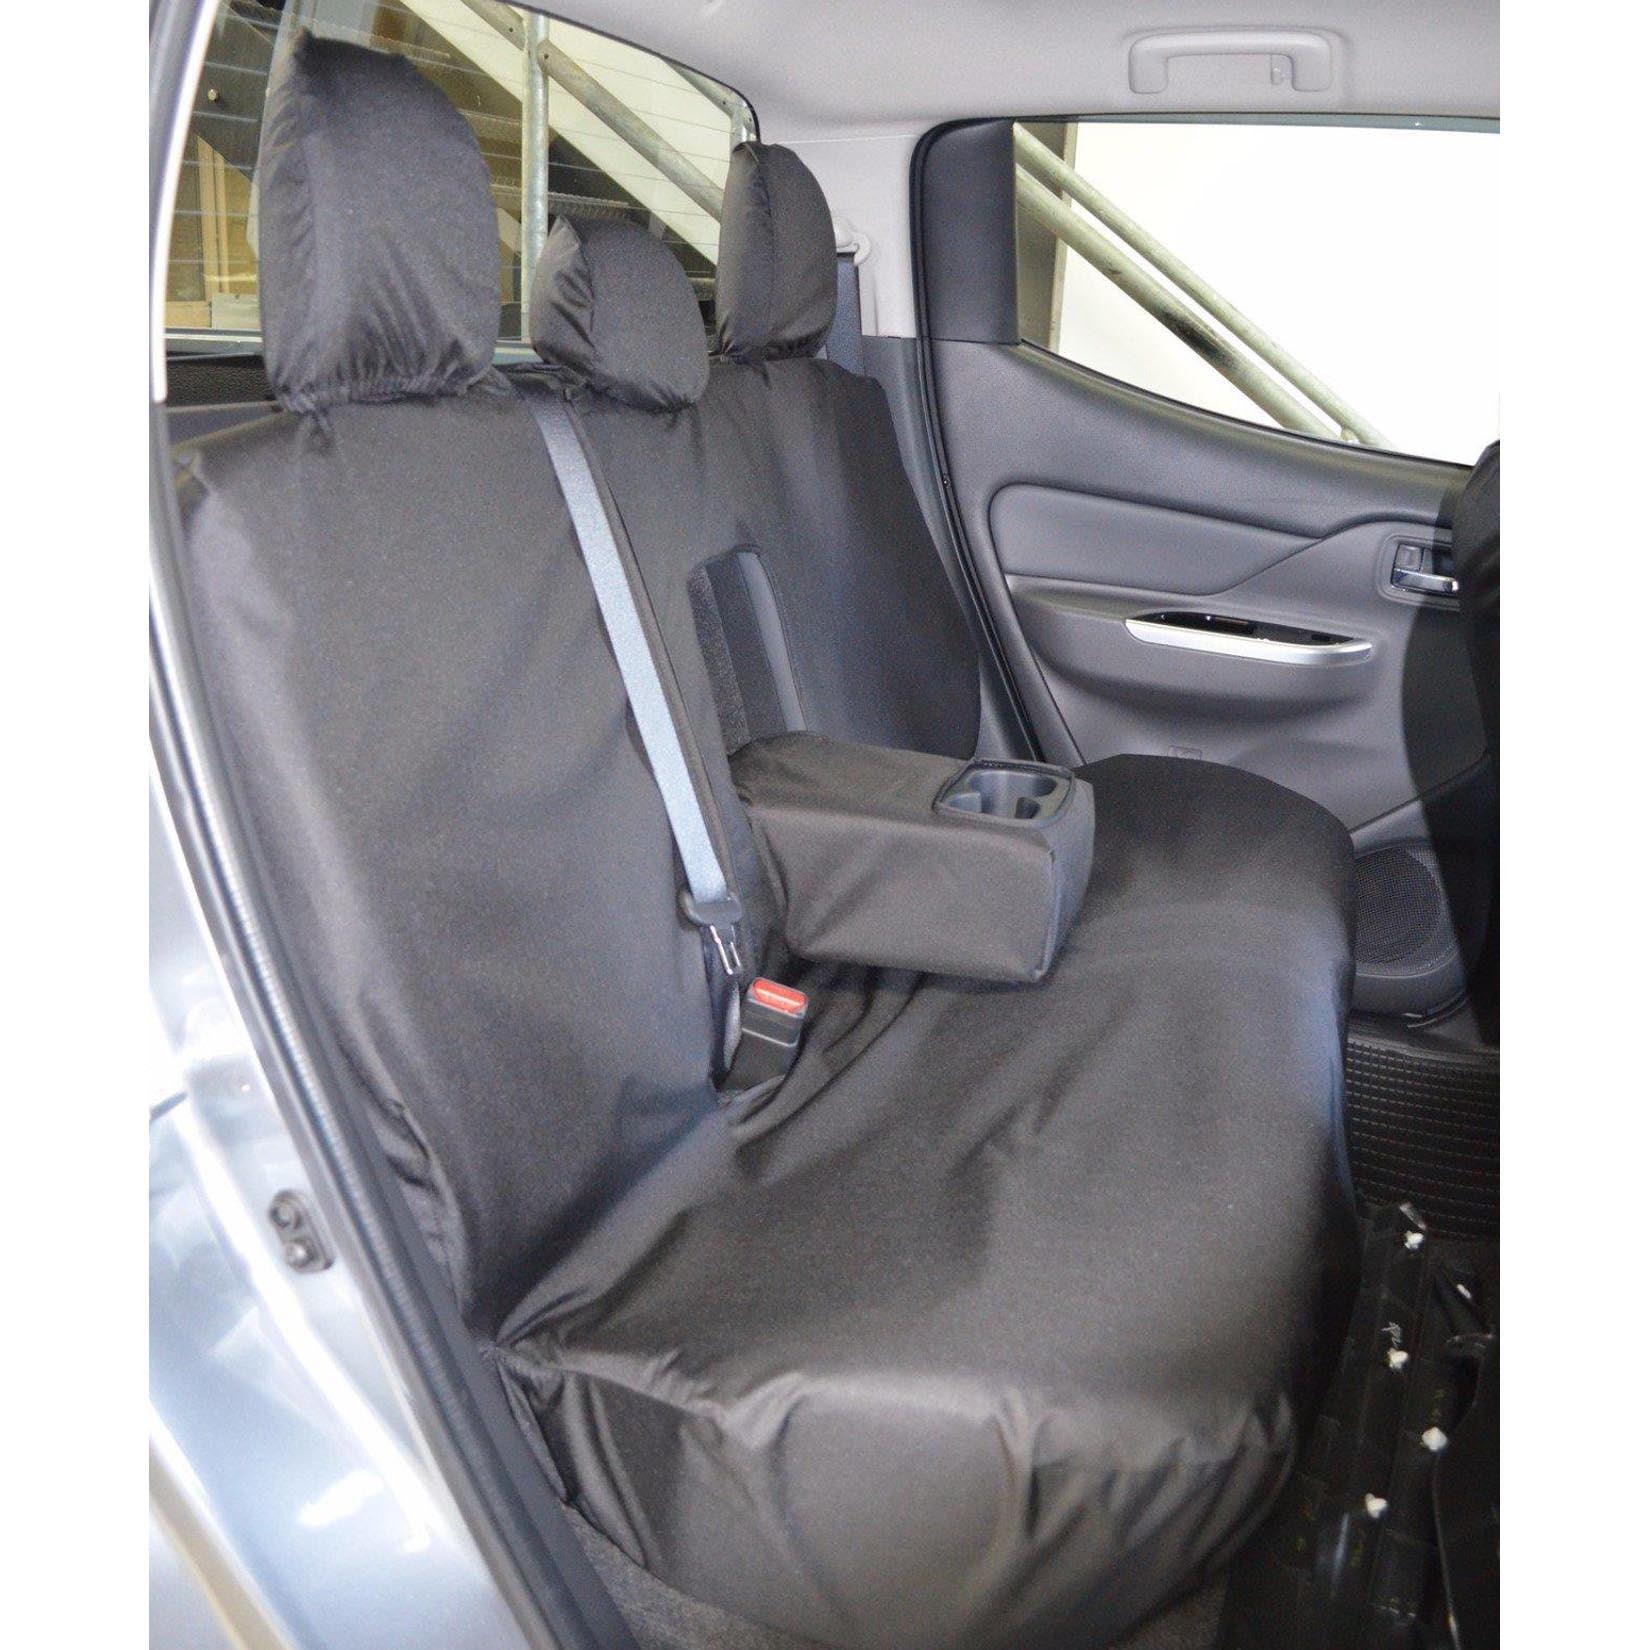 FIAT FULLBACK 2016 ON DOUBLE CAB REAR SEAT COVERS – BLACK - Storm Xccessories2